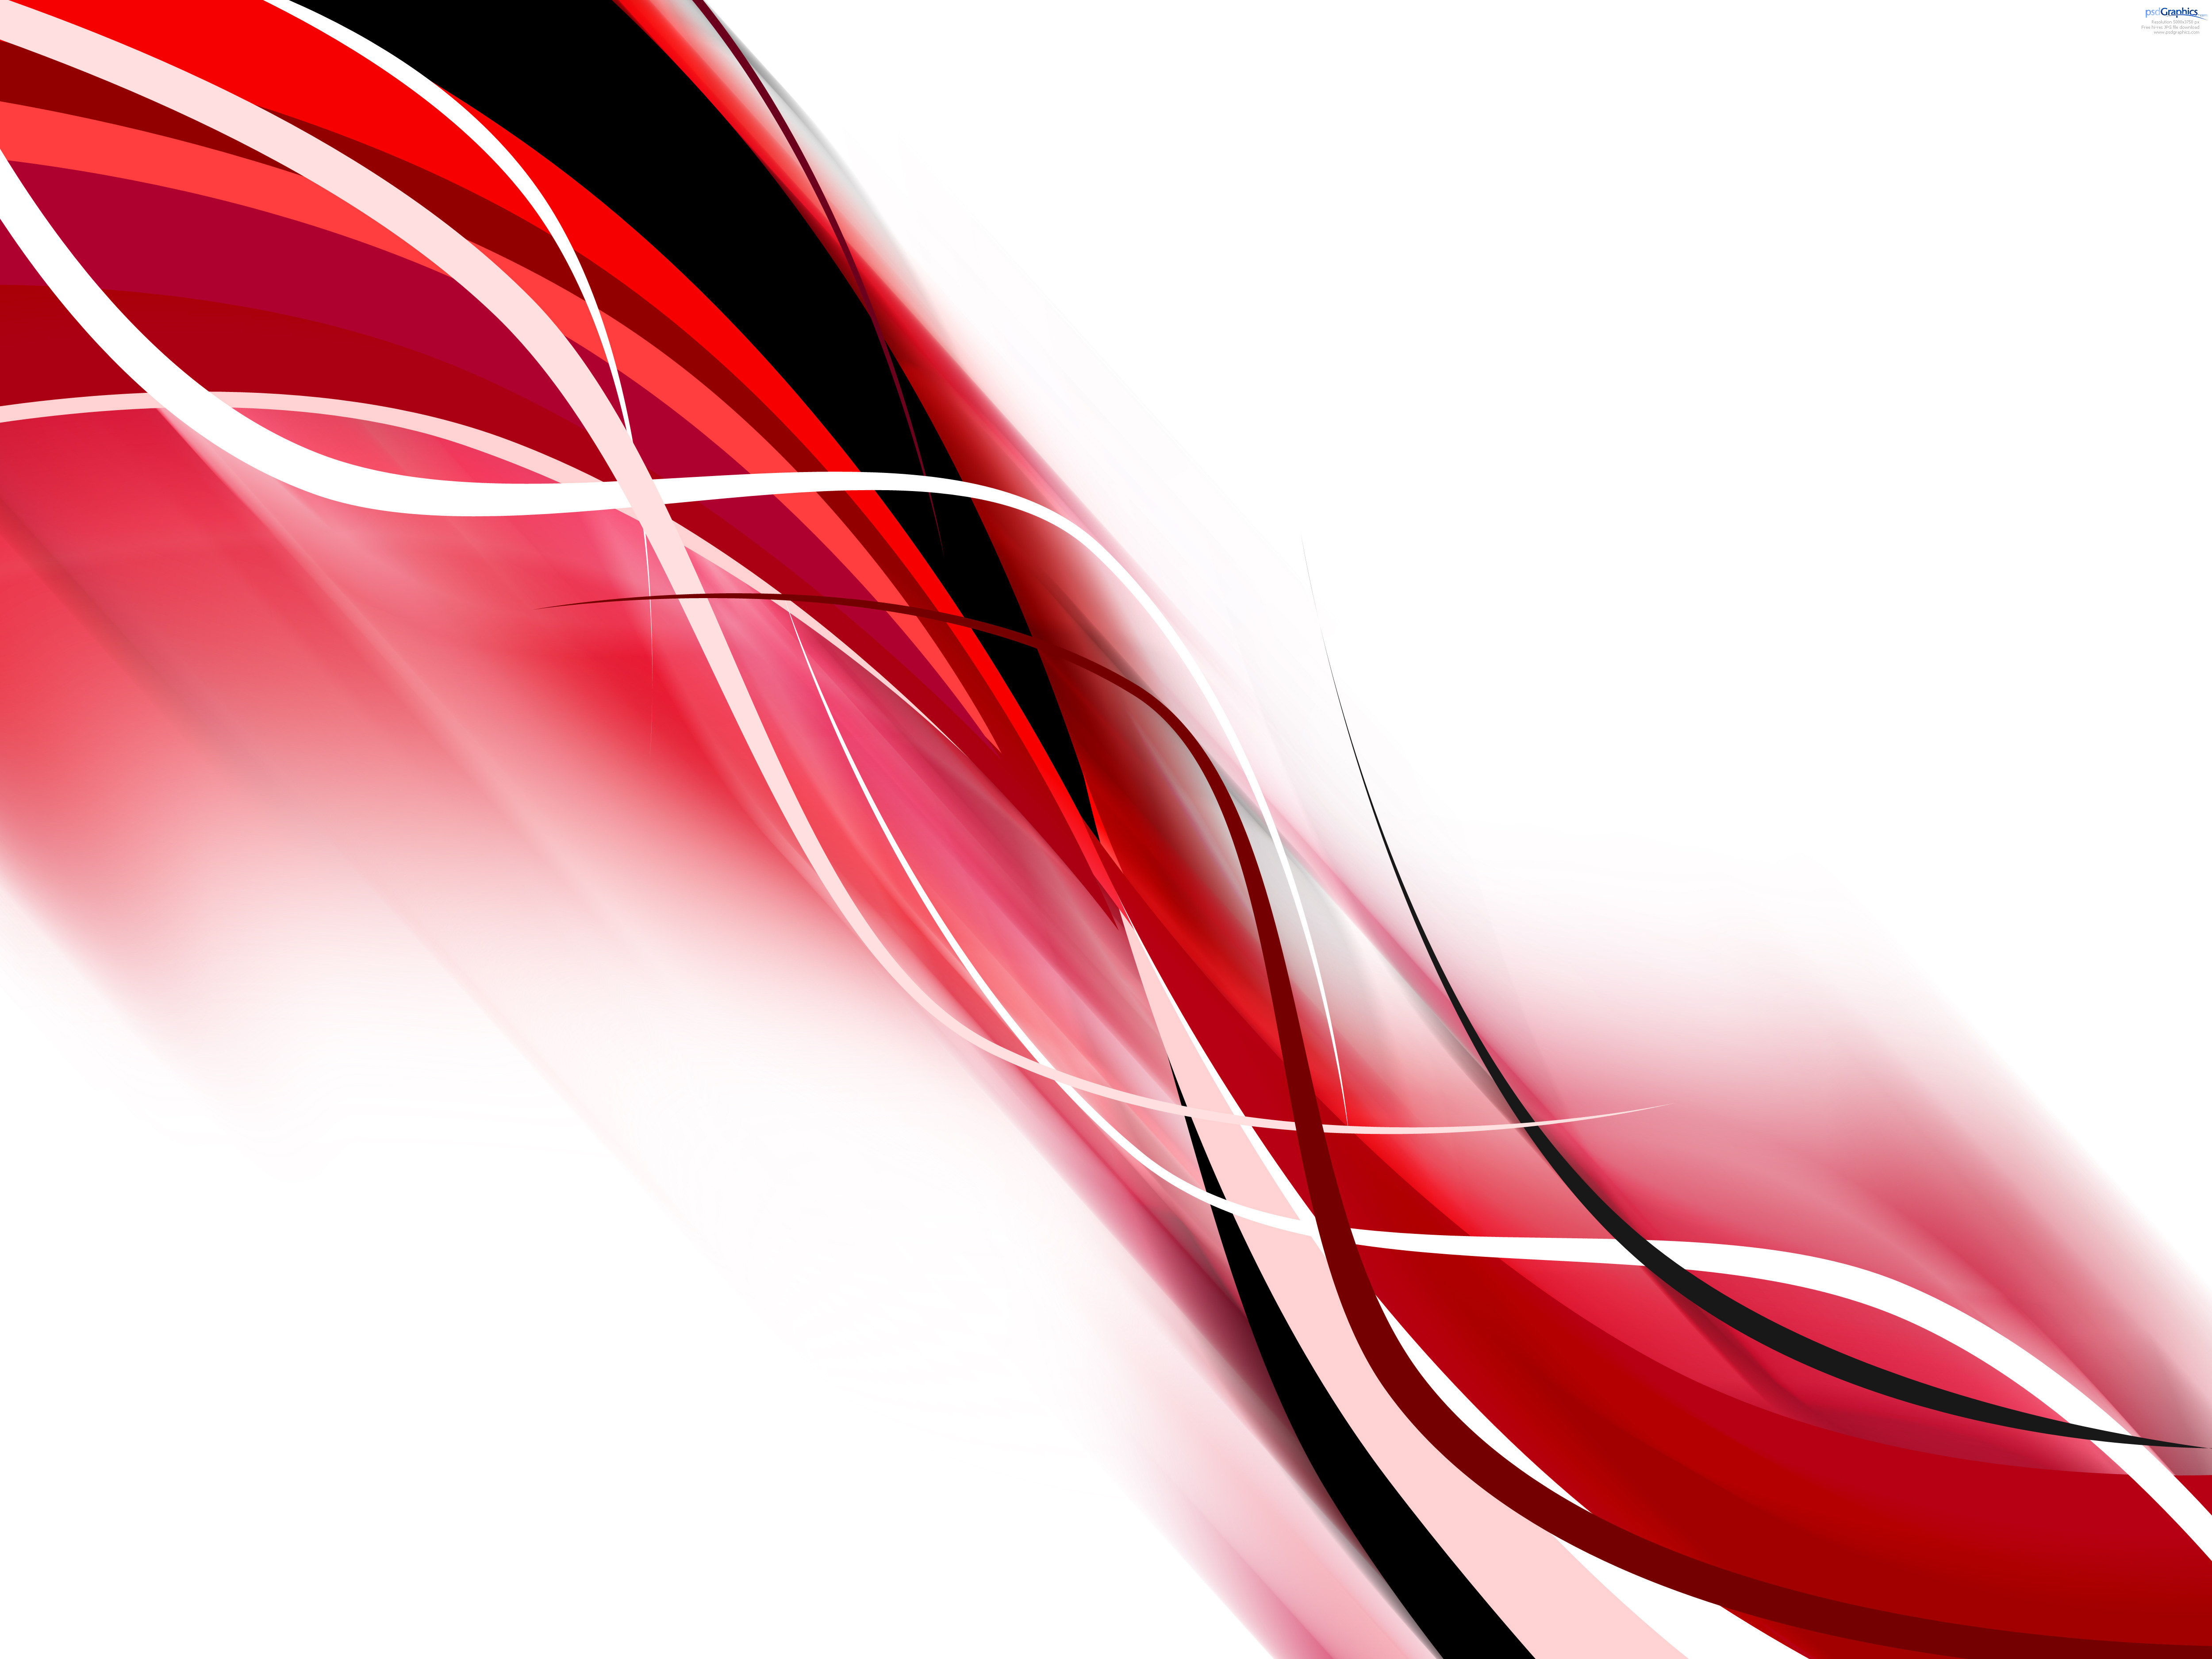 Abstract Art Graphic Design Red Black